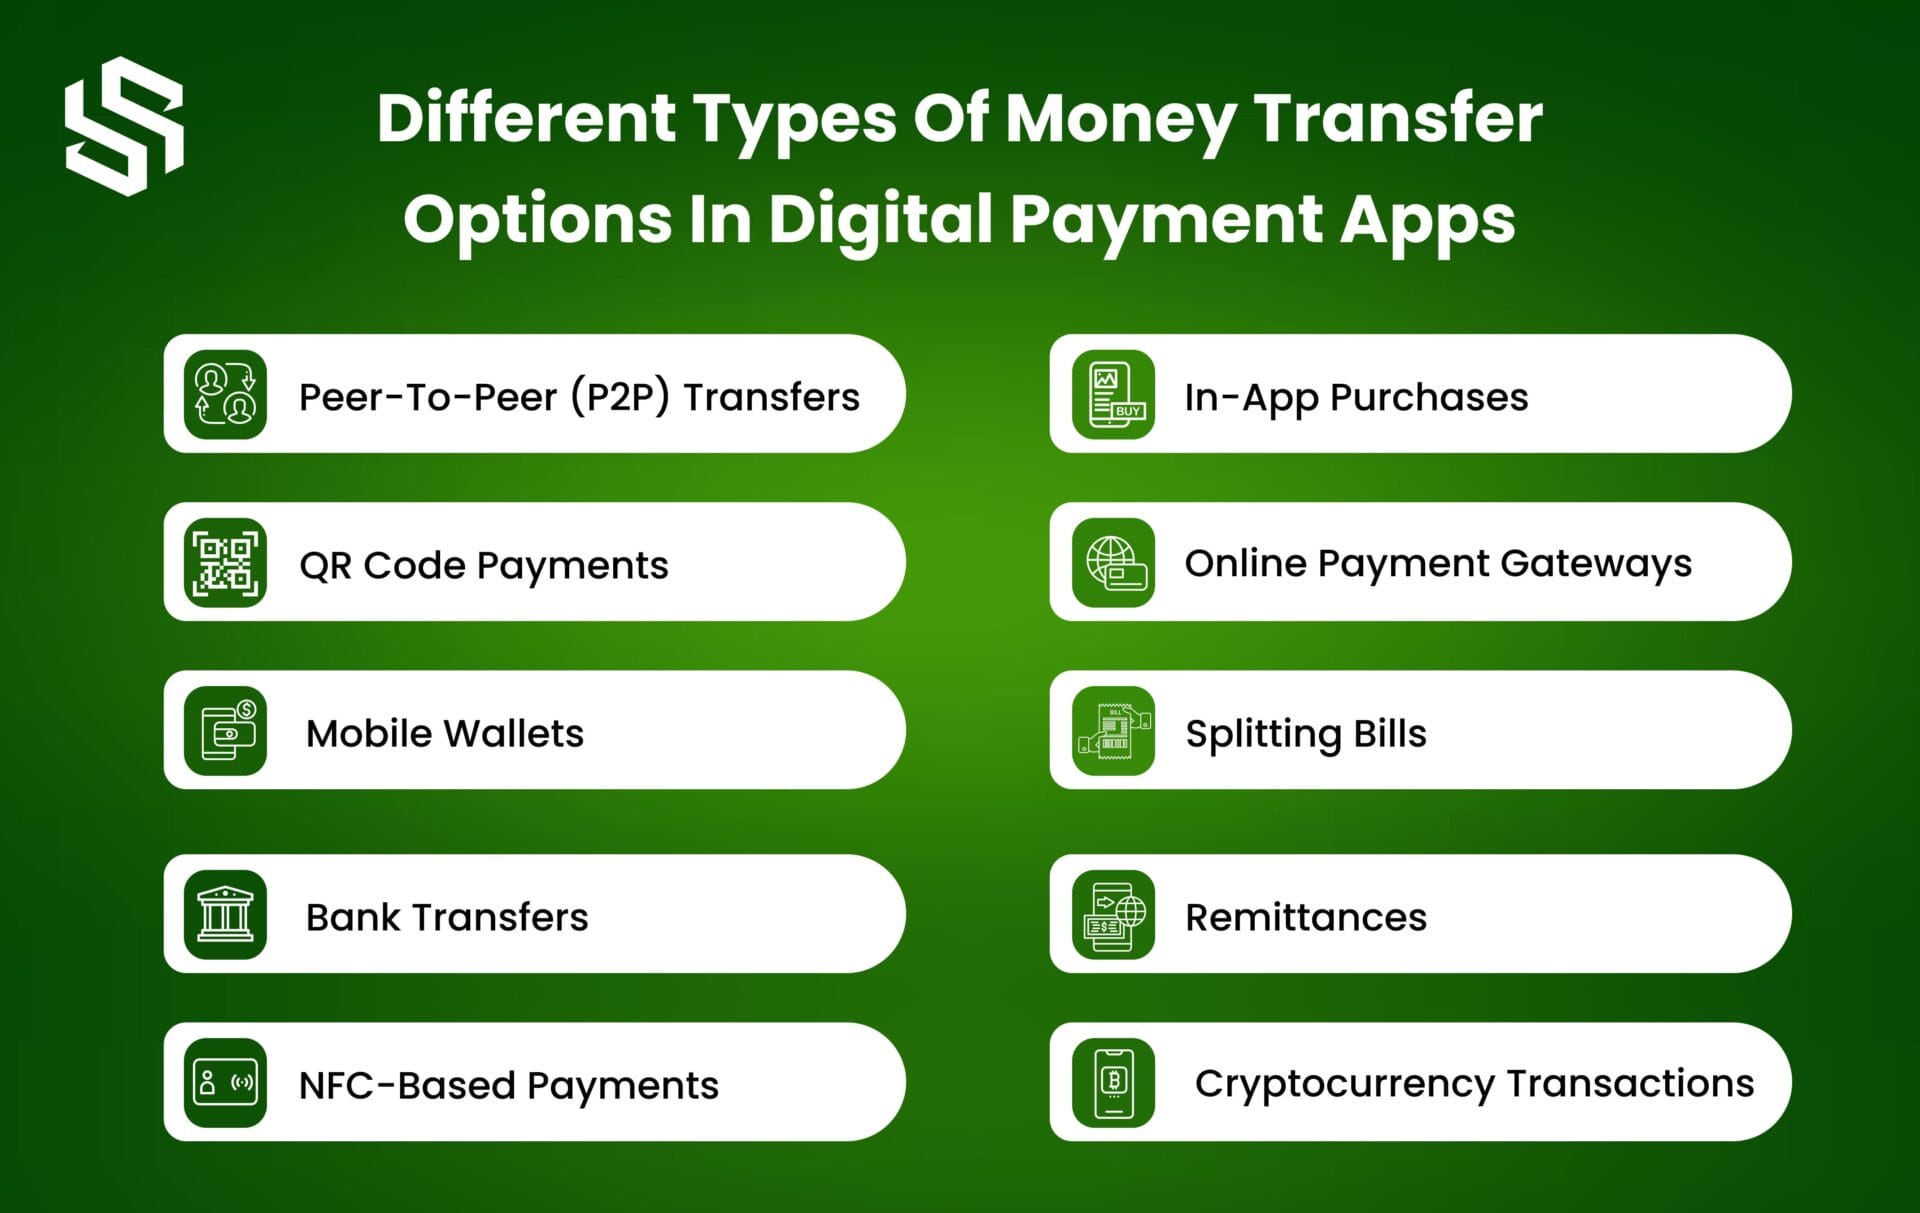 Different Types of Money Transaction Options in Digital Payment Apps